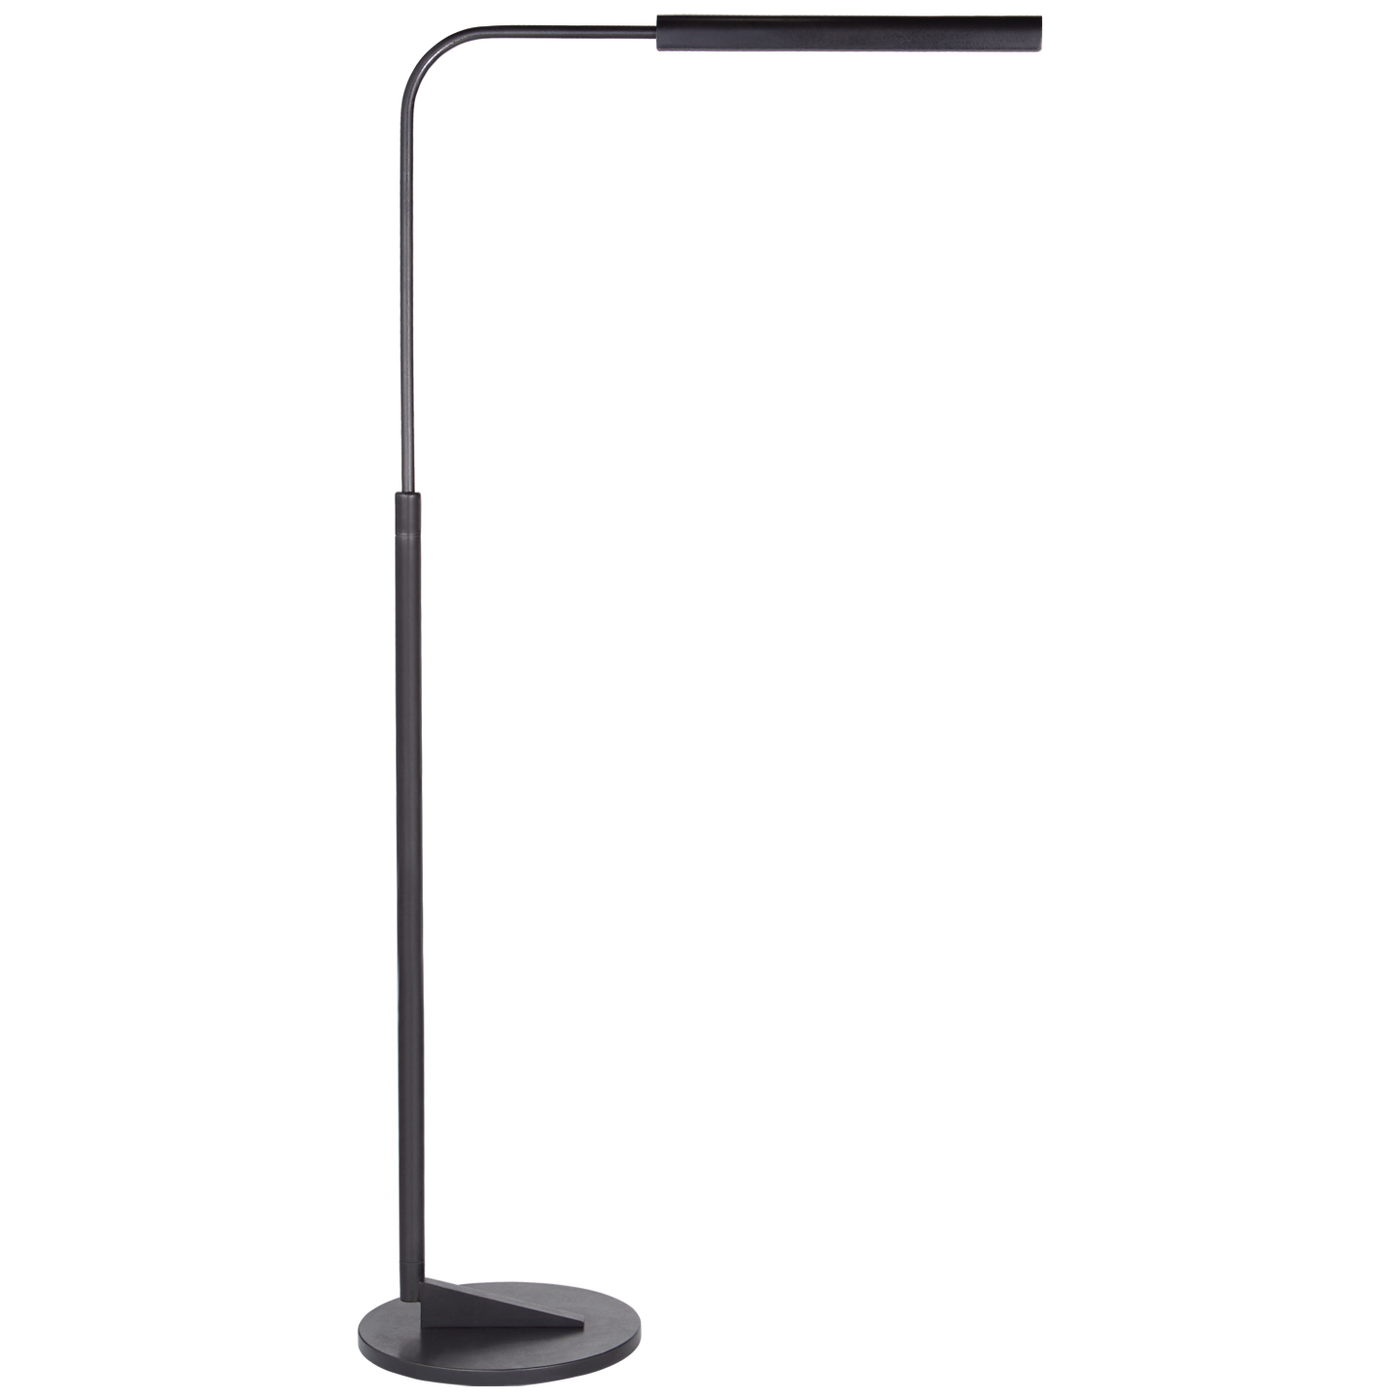 FLOOR LAMP ADJUSTABLE (Available in 2 Finishes)